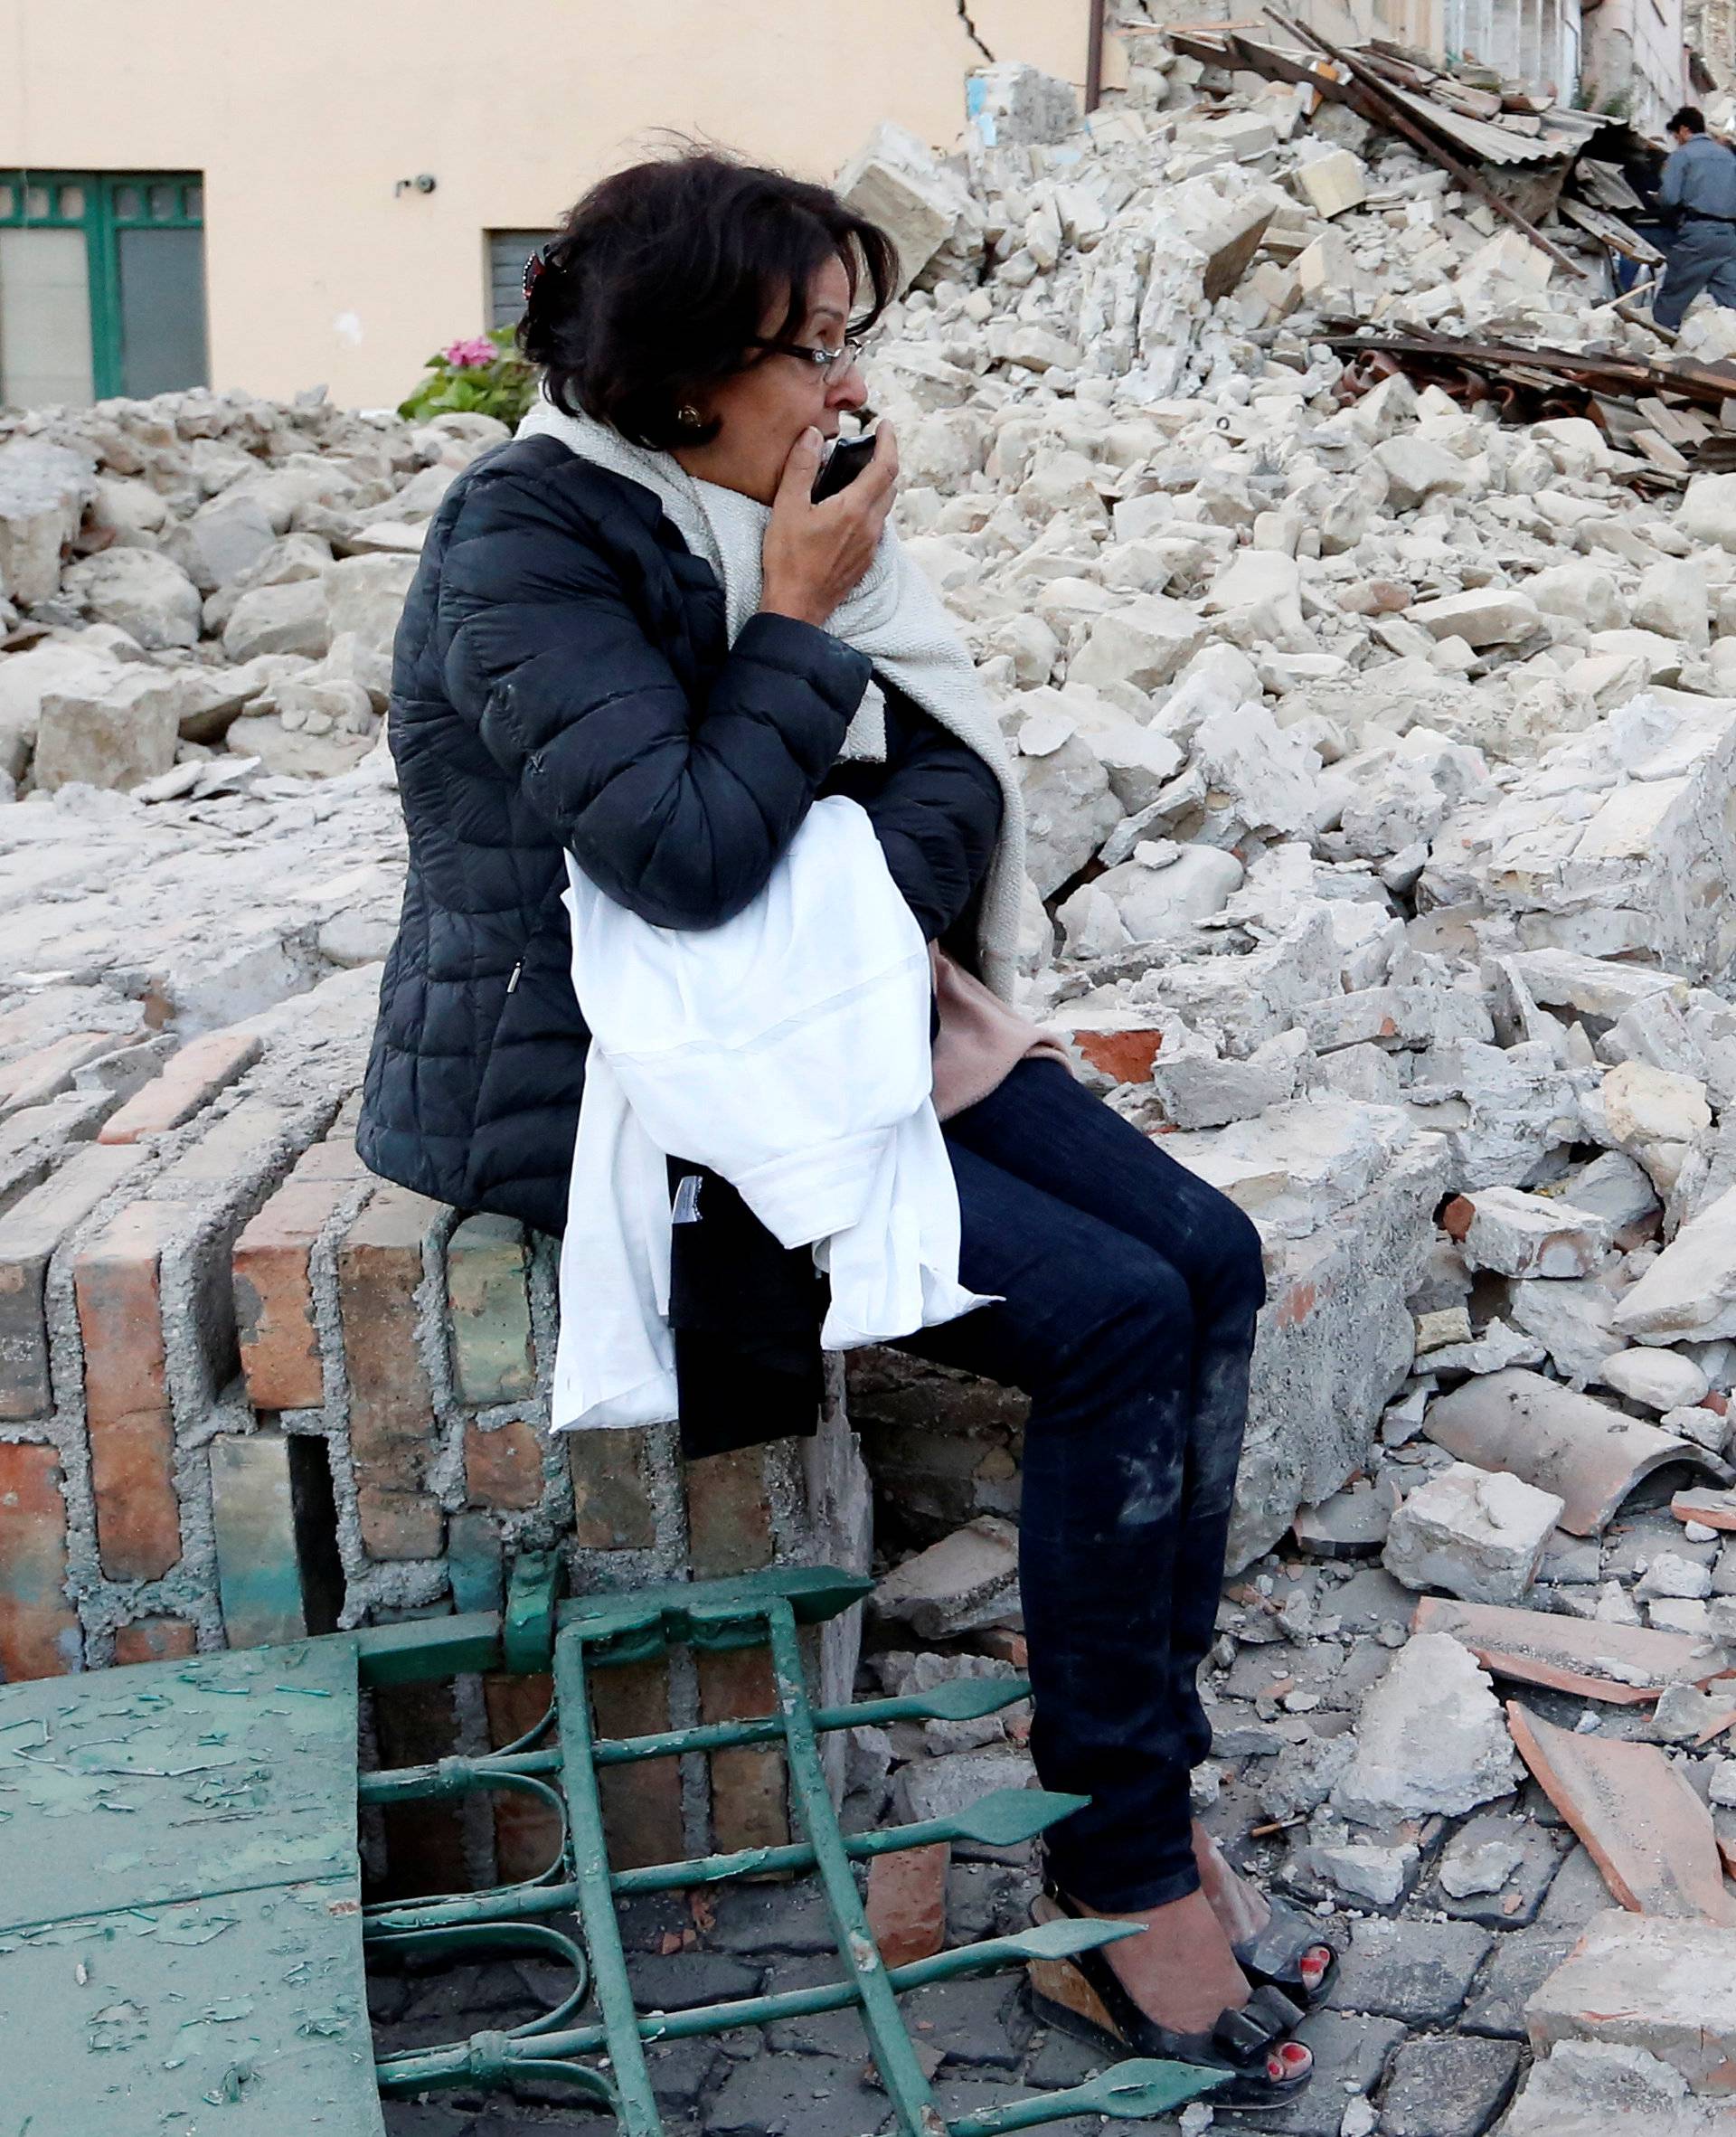 A woman sits amongst rubble following a quake in Amatrice